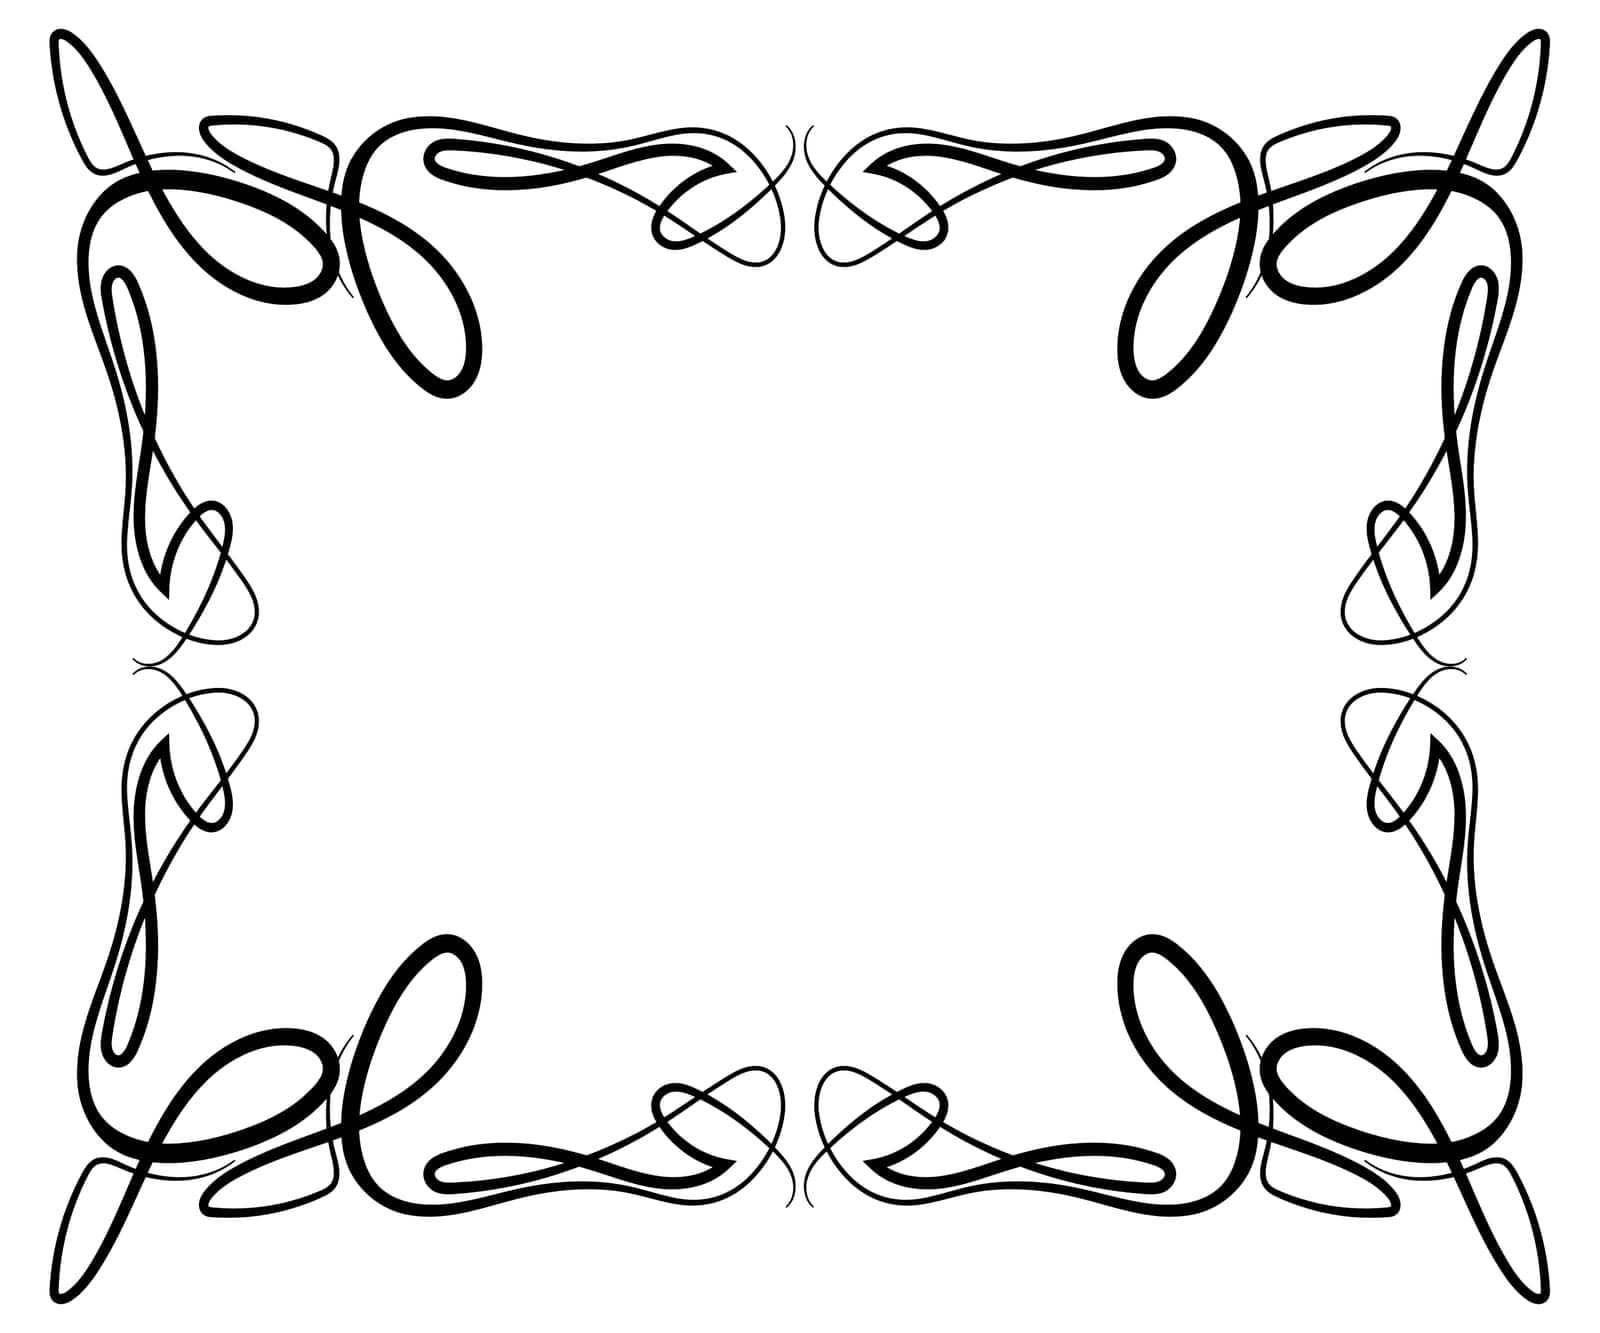 Vector frame and vignette for design template. Element in Victorian style. Ornate decor for invitations, greeting cards, certificate.